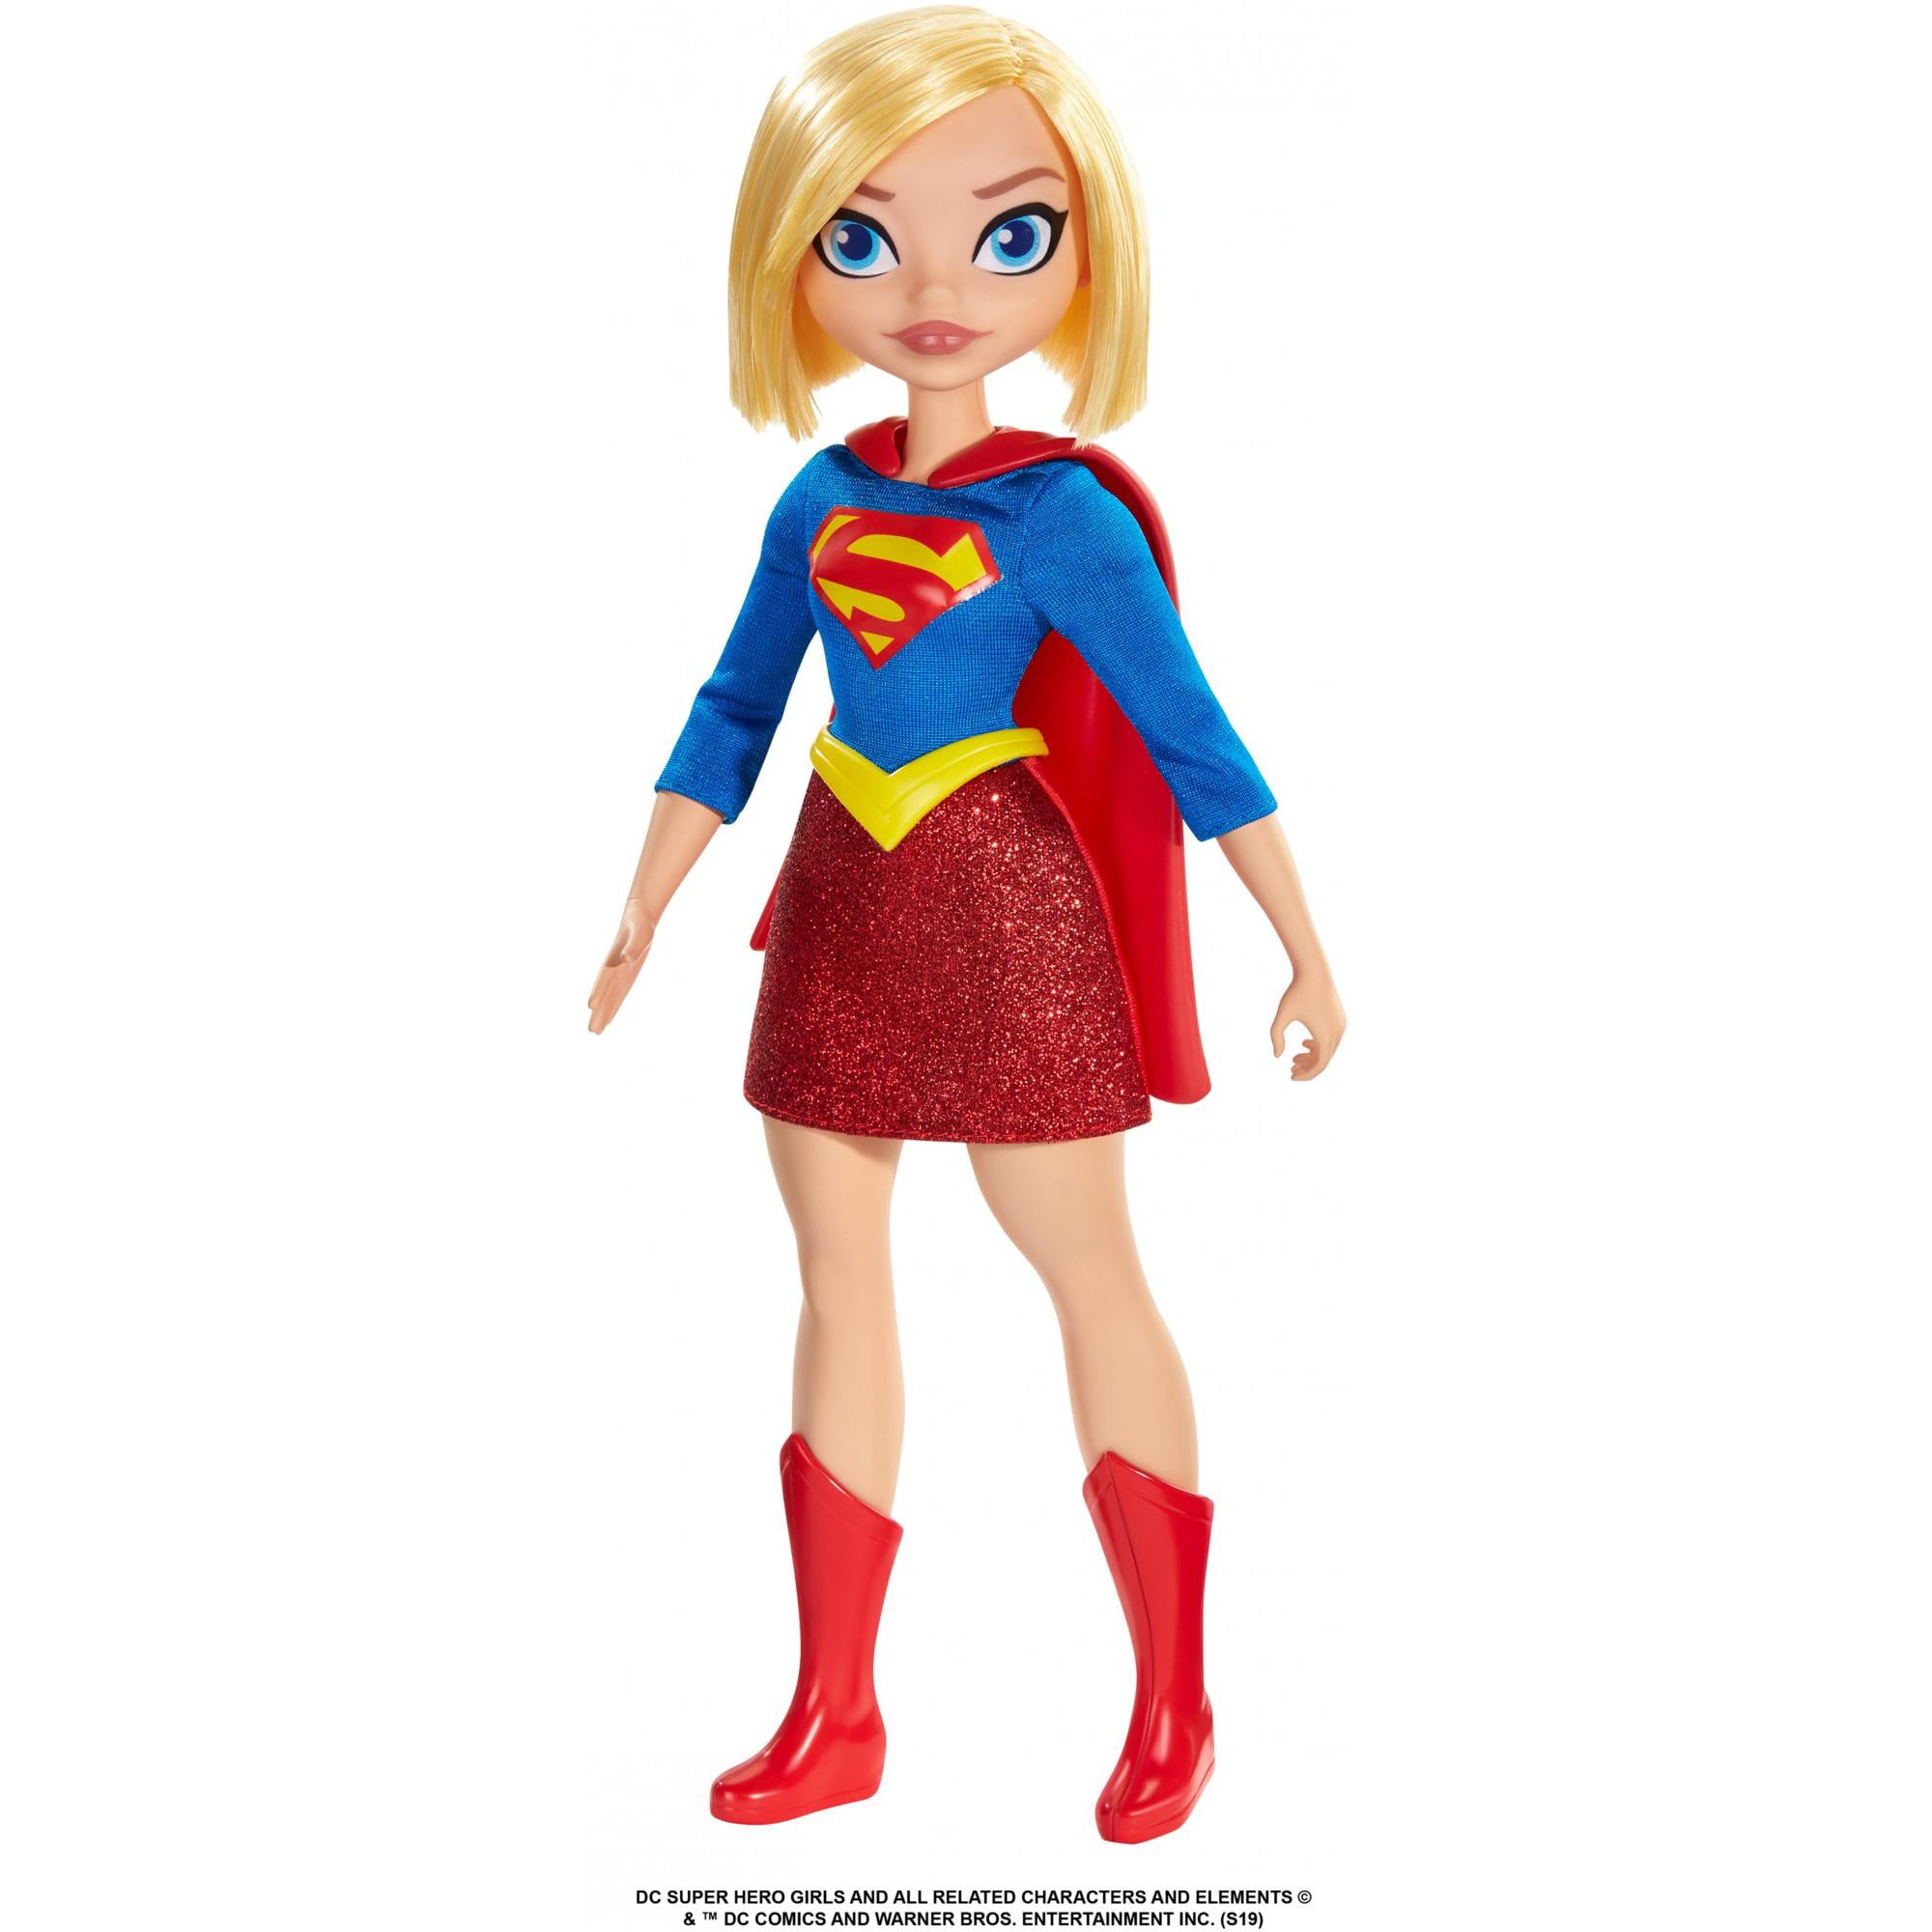 DC Super Hero Girls Supergirl Doll with 